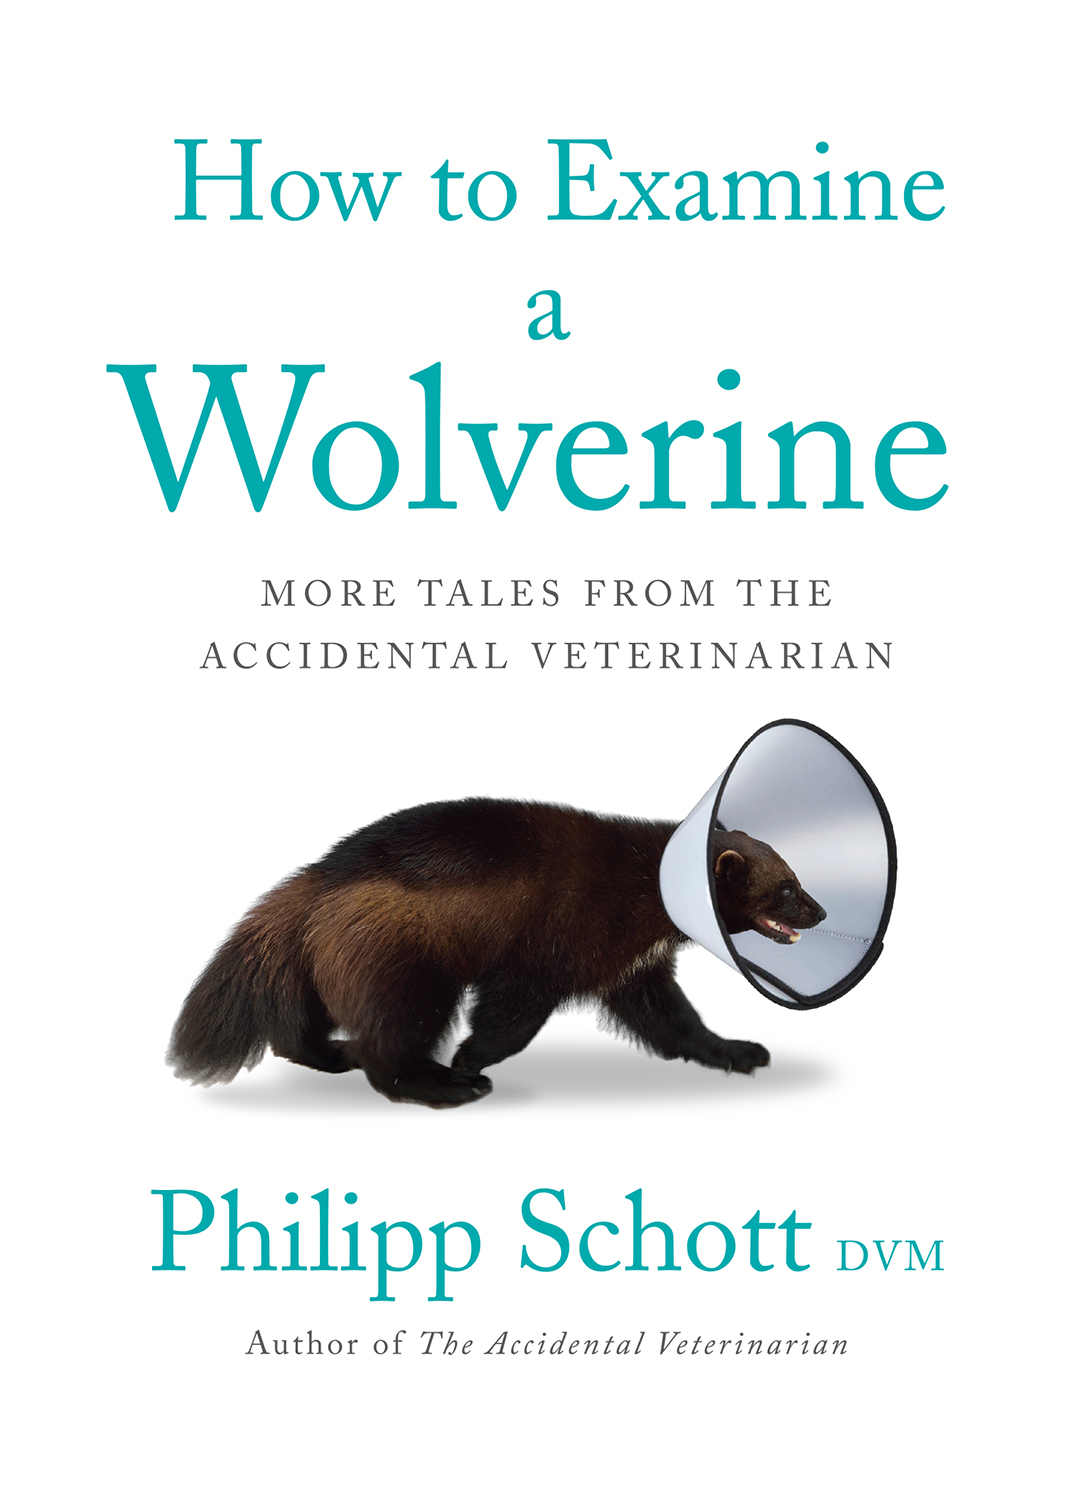 How to Examine a Wolverine More Tales from the Accidental Veterinarian - photo 1